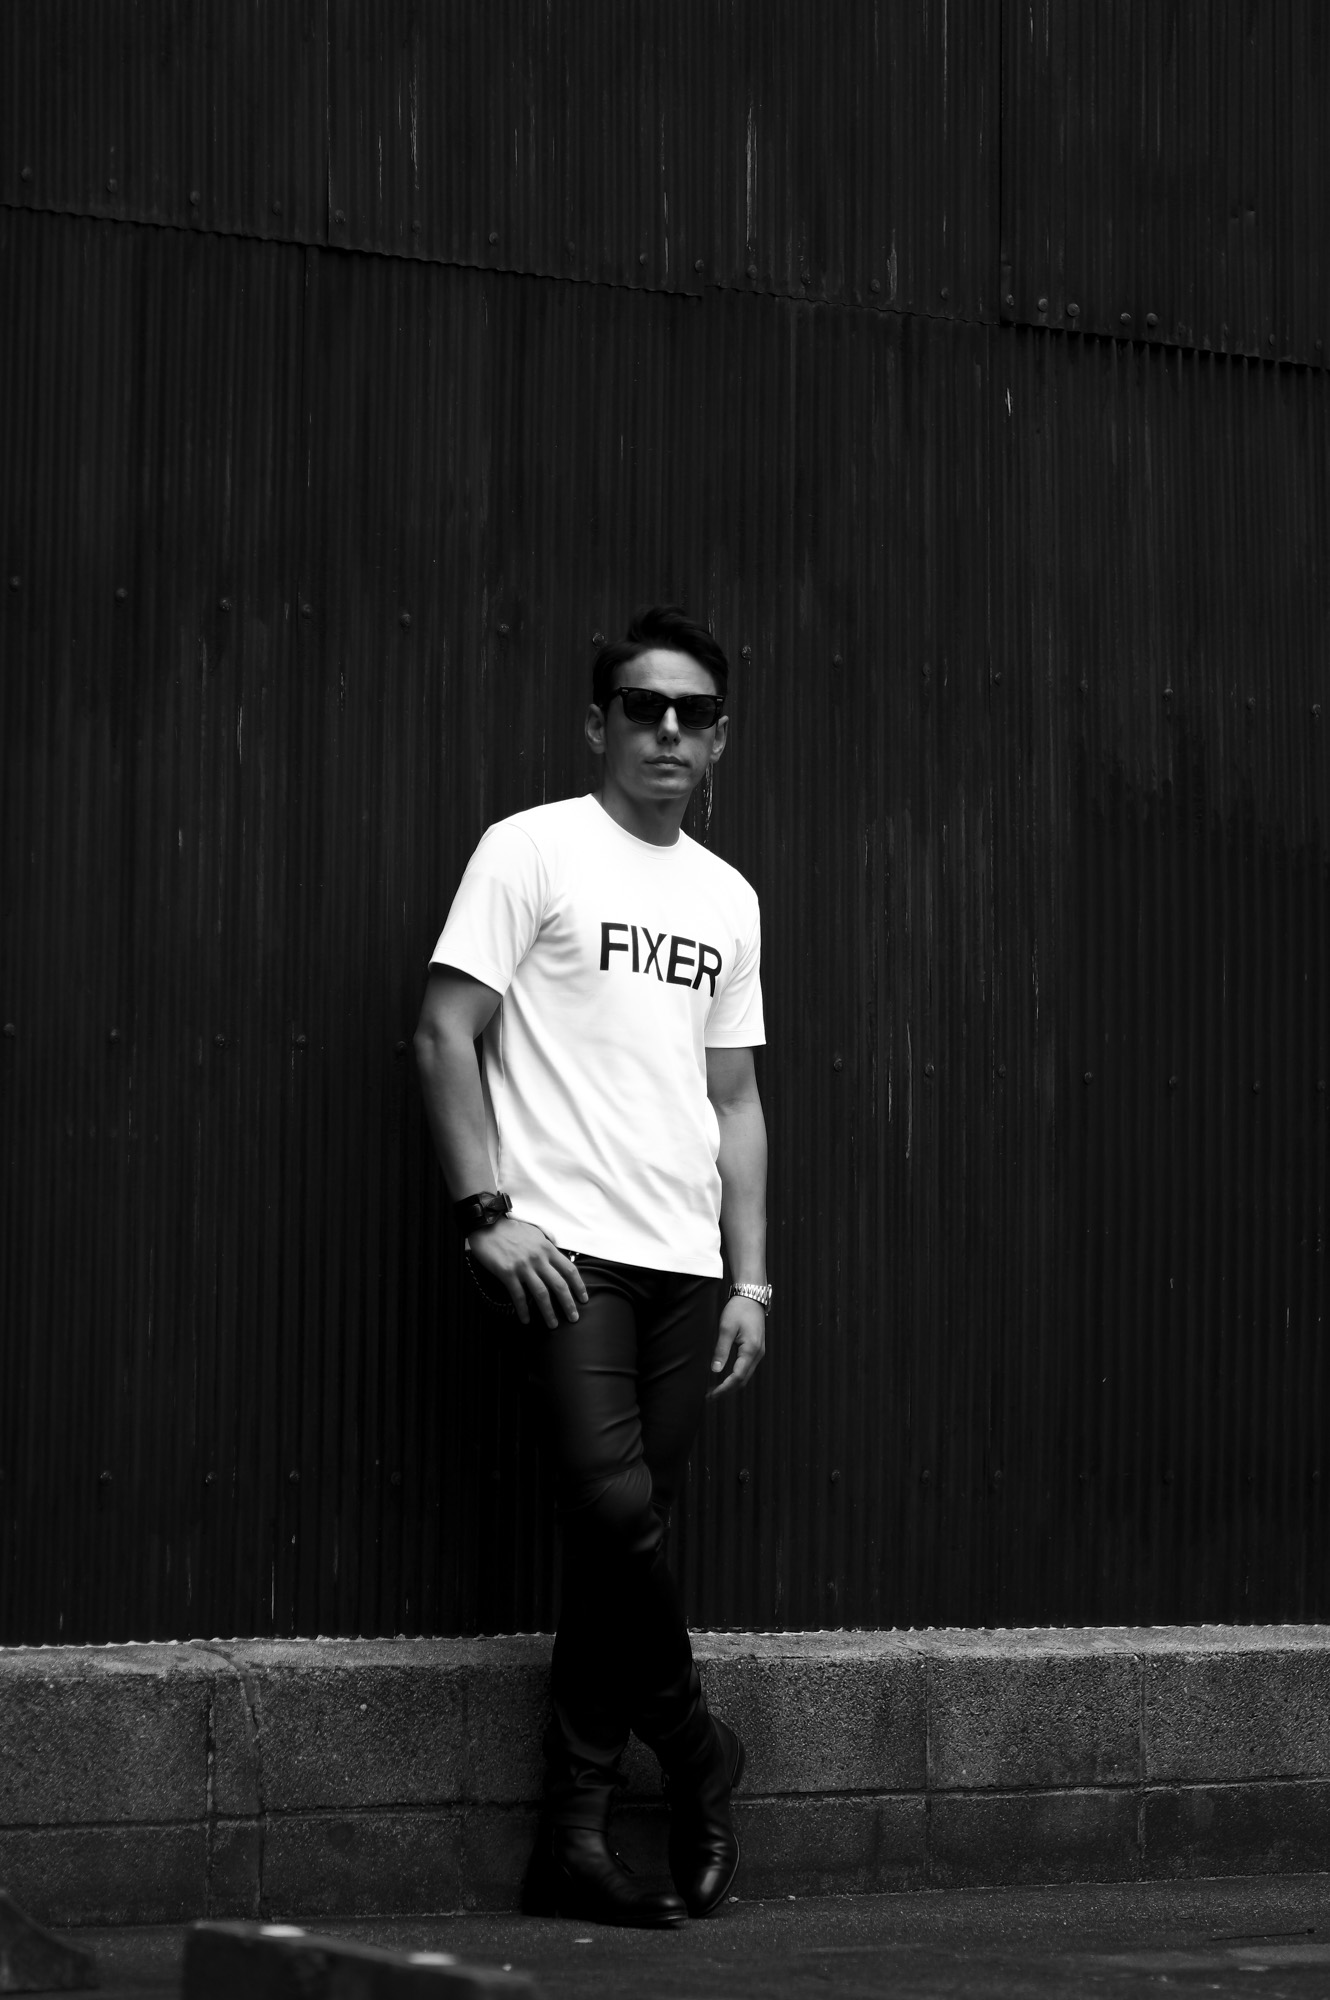 FIXER FTS-02 Print Crew Neck T-shirt WHITE 【Special Model】【東京限定】フィクサー プリントTシャツ ホワイト ブラックロゴ 愛知 名古屋 Alto e Diritto altoediritto アルトエデリット 東京限定